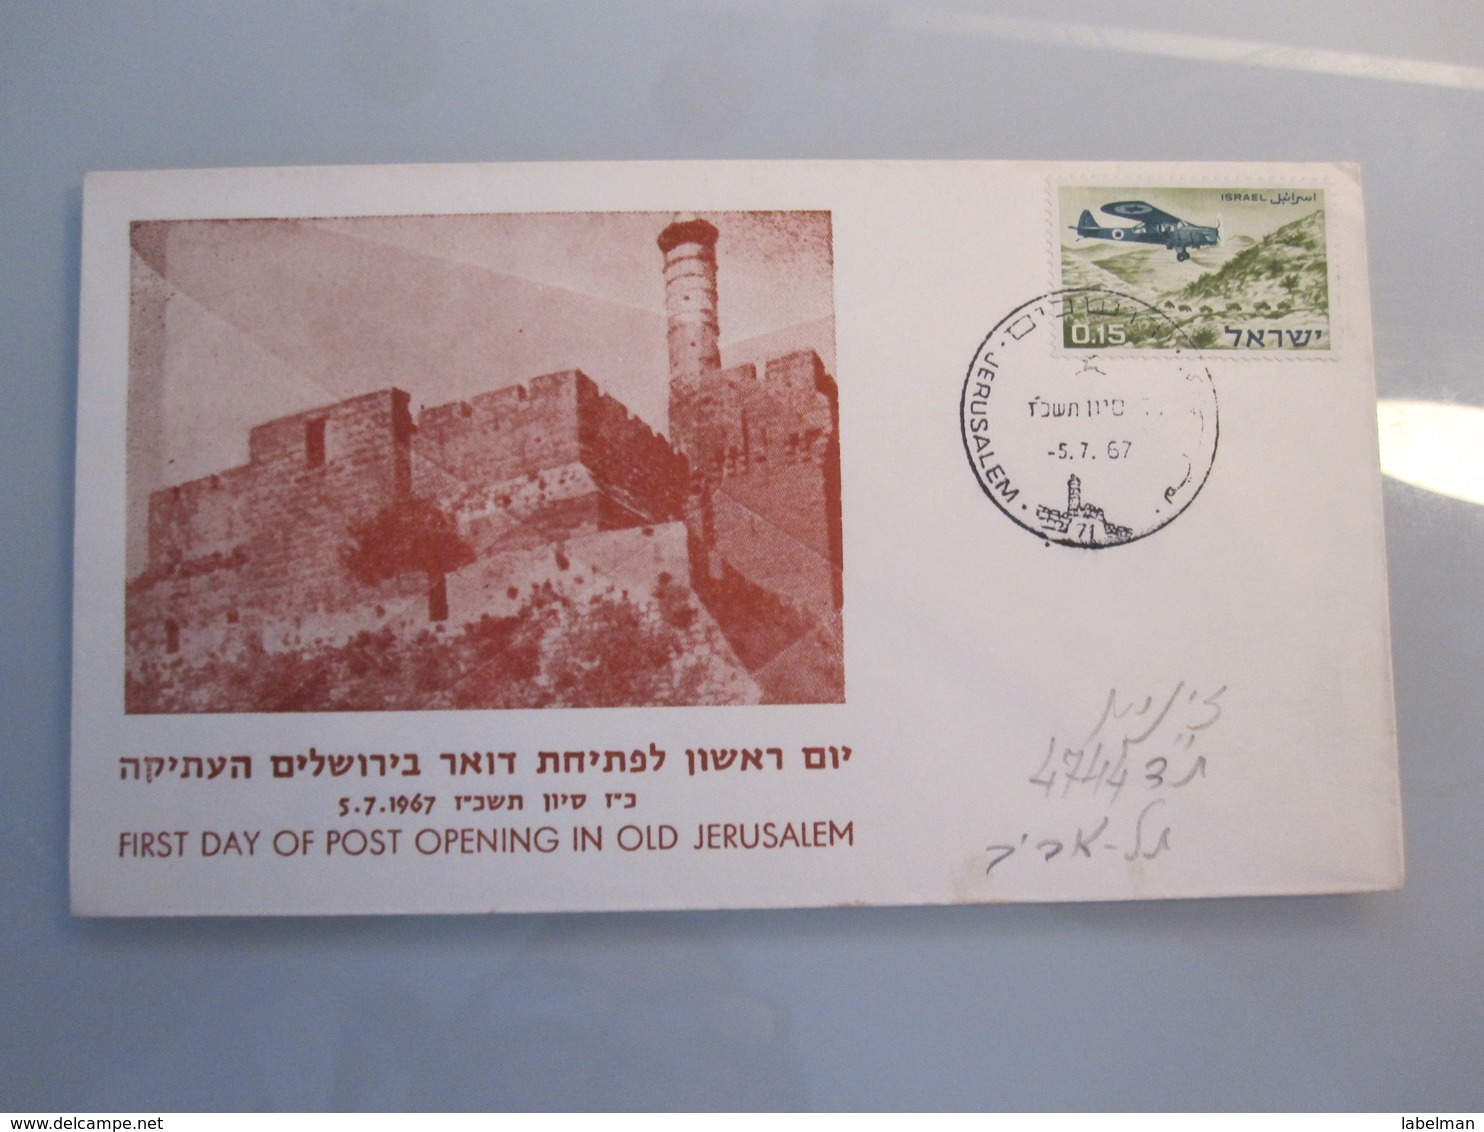 1967 POO FIRST DAY POST OFFICE OPENING MILITARY GOVERNMENT JERUSALEM JORDAN PALESTINE 6 DAYS WAR COVER ISRAEL CACHET - Covers & Documents